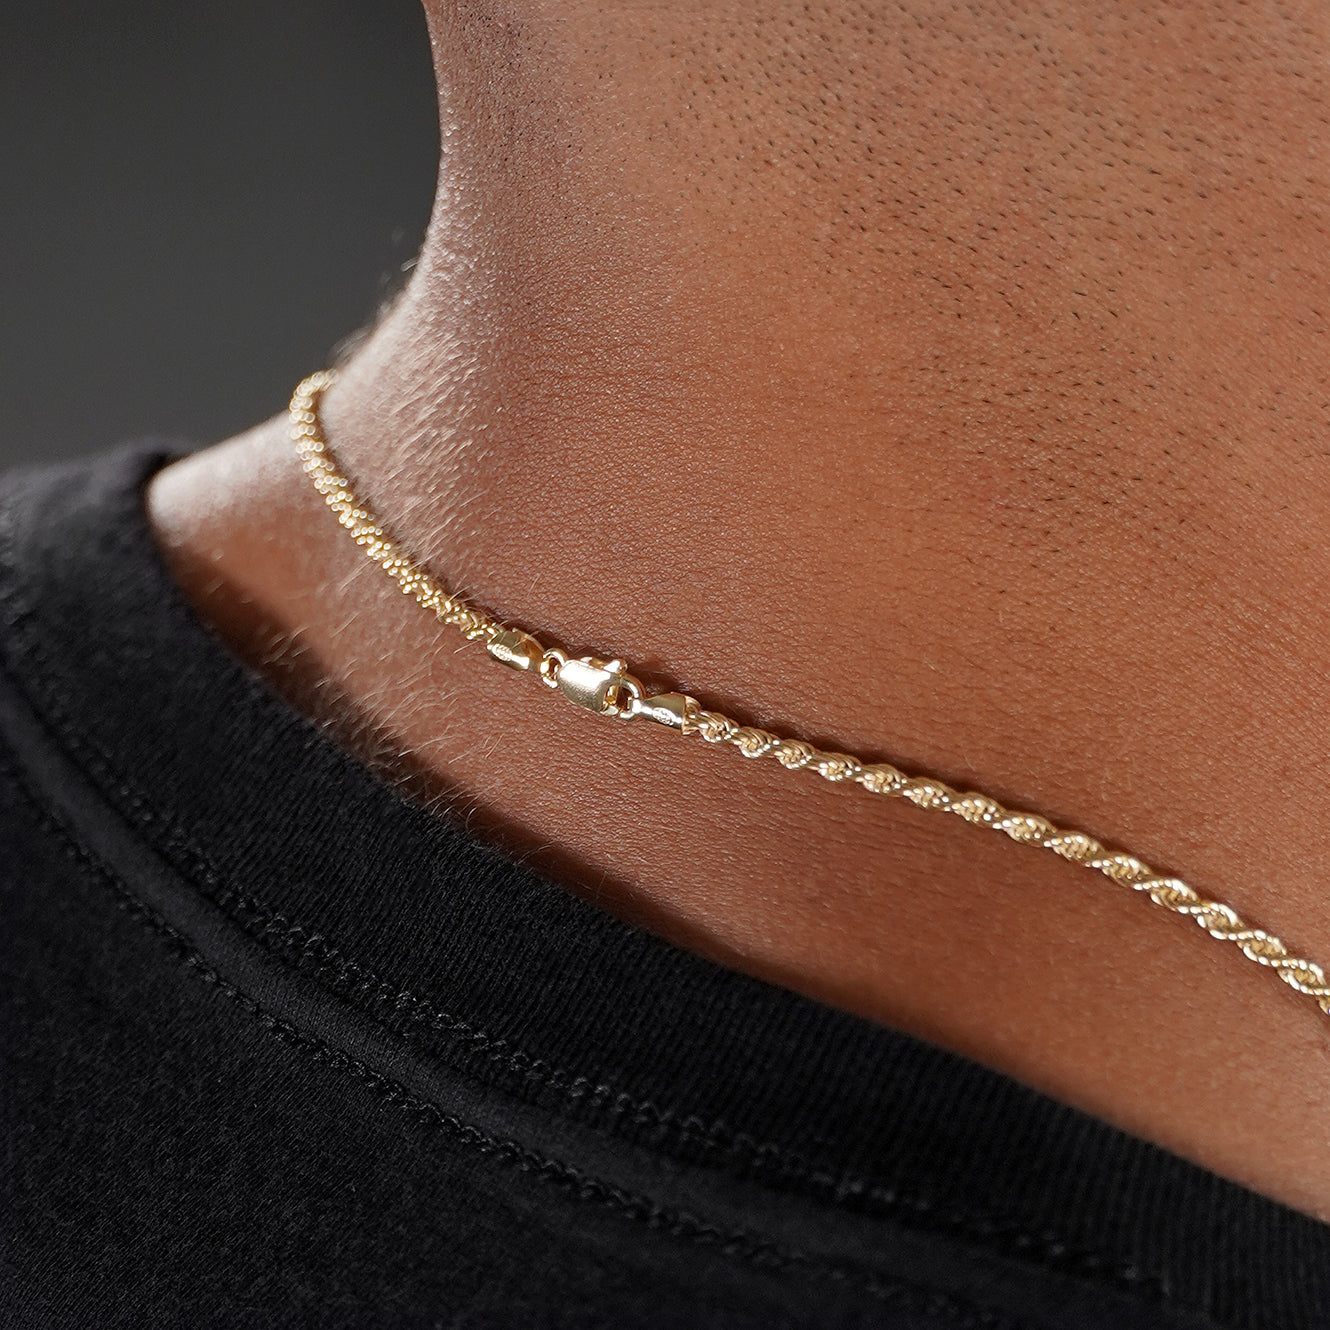 Rope Gold Chain - 2.5mm